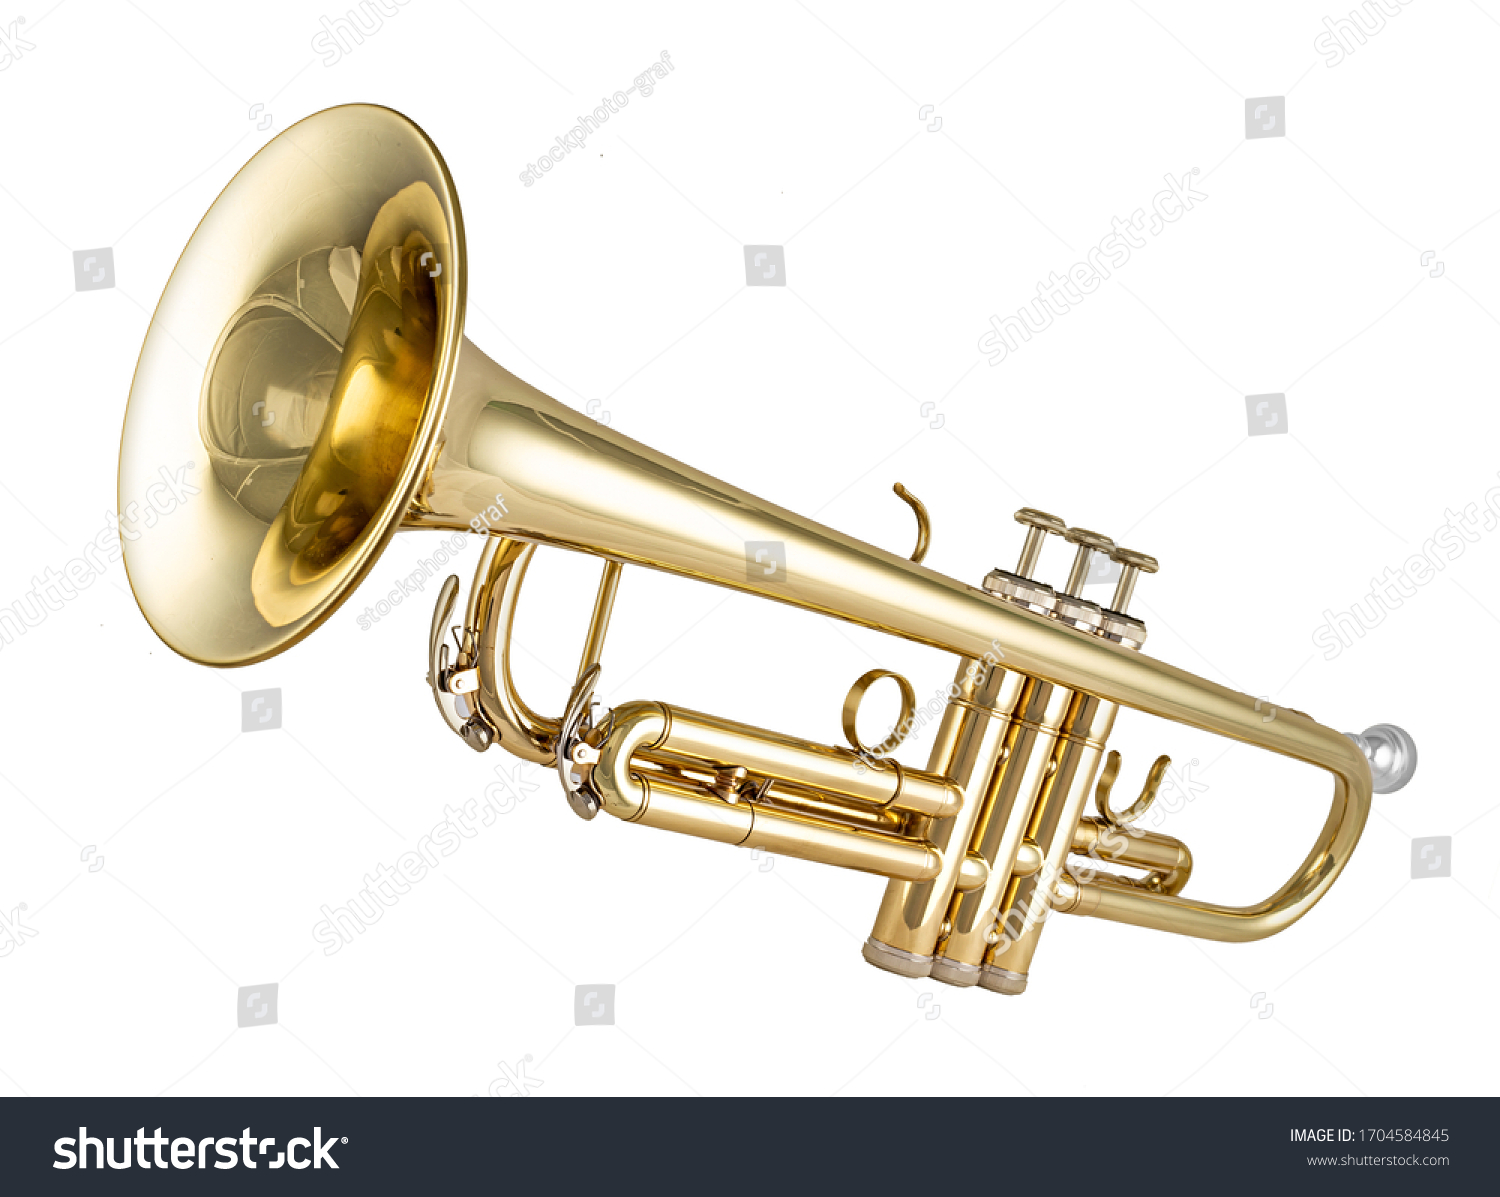 Golden shiny new metallic brass trumpet music instrument isolated on white background. musical equipment entertainment orchestra band concept. #1704584845